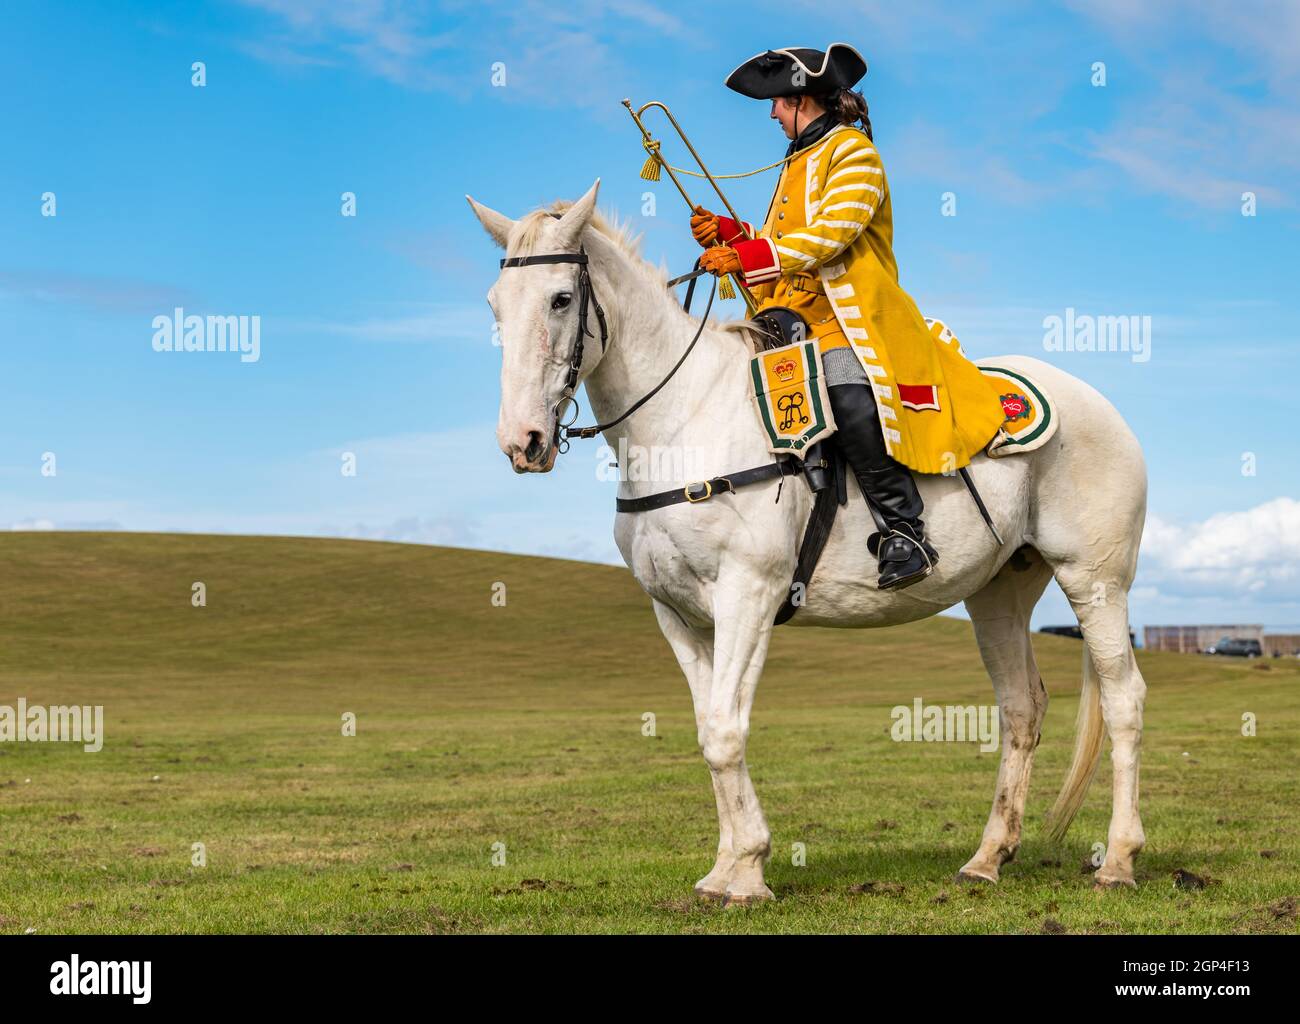 A horse rider with trumpet in re-enactment of Battle of Prestonpans in period costume, East Lothian, Scotland, UK Stock Photo